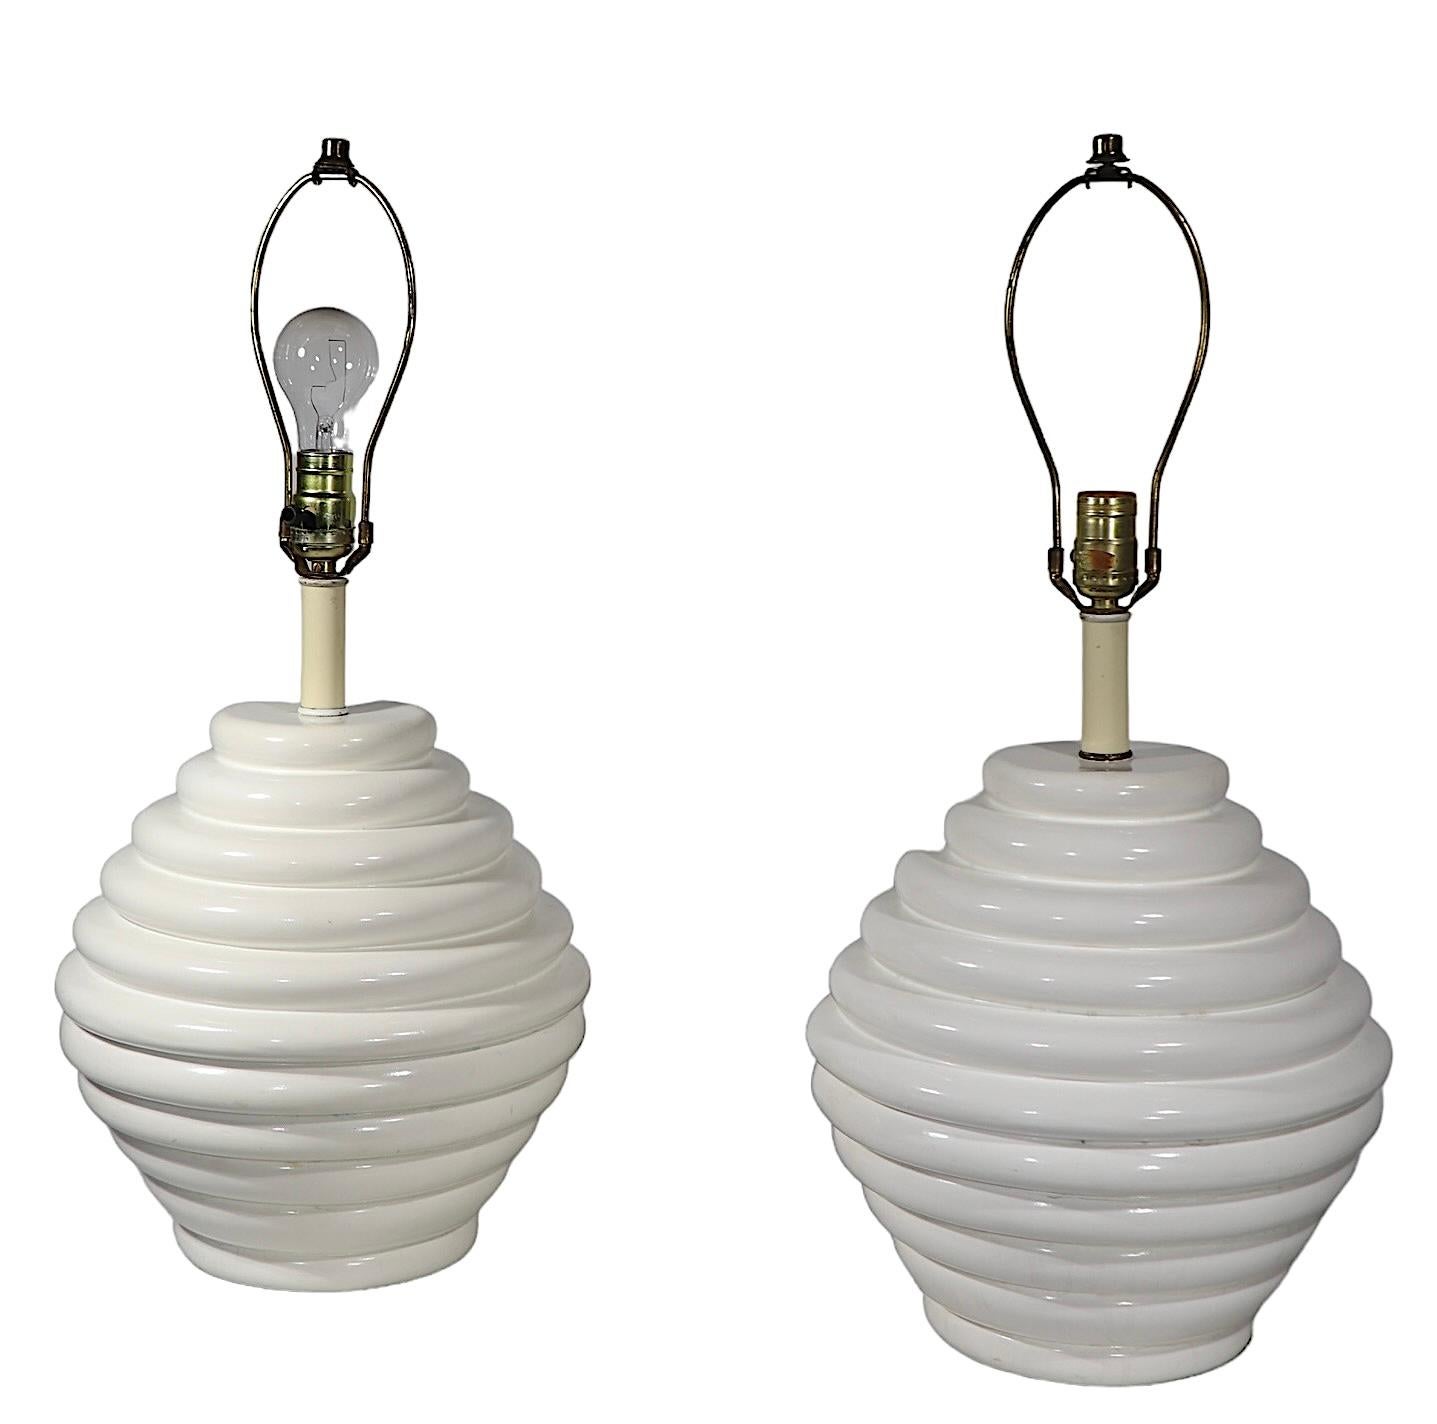 Pr. Mid Century Space Age Bulbous Form Table Lamps in White Finish c. 1950/70's For Sale 10